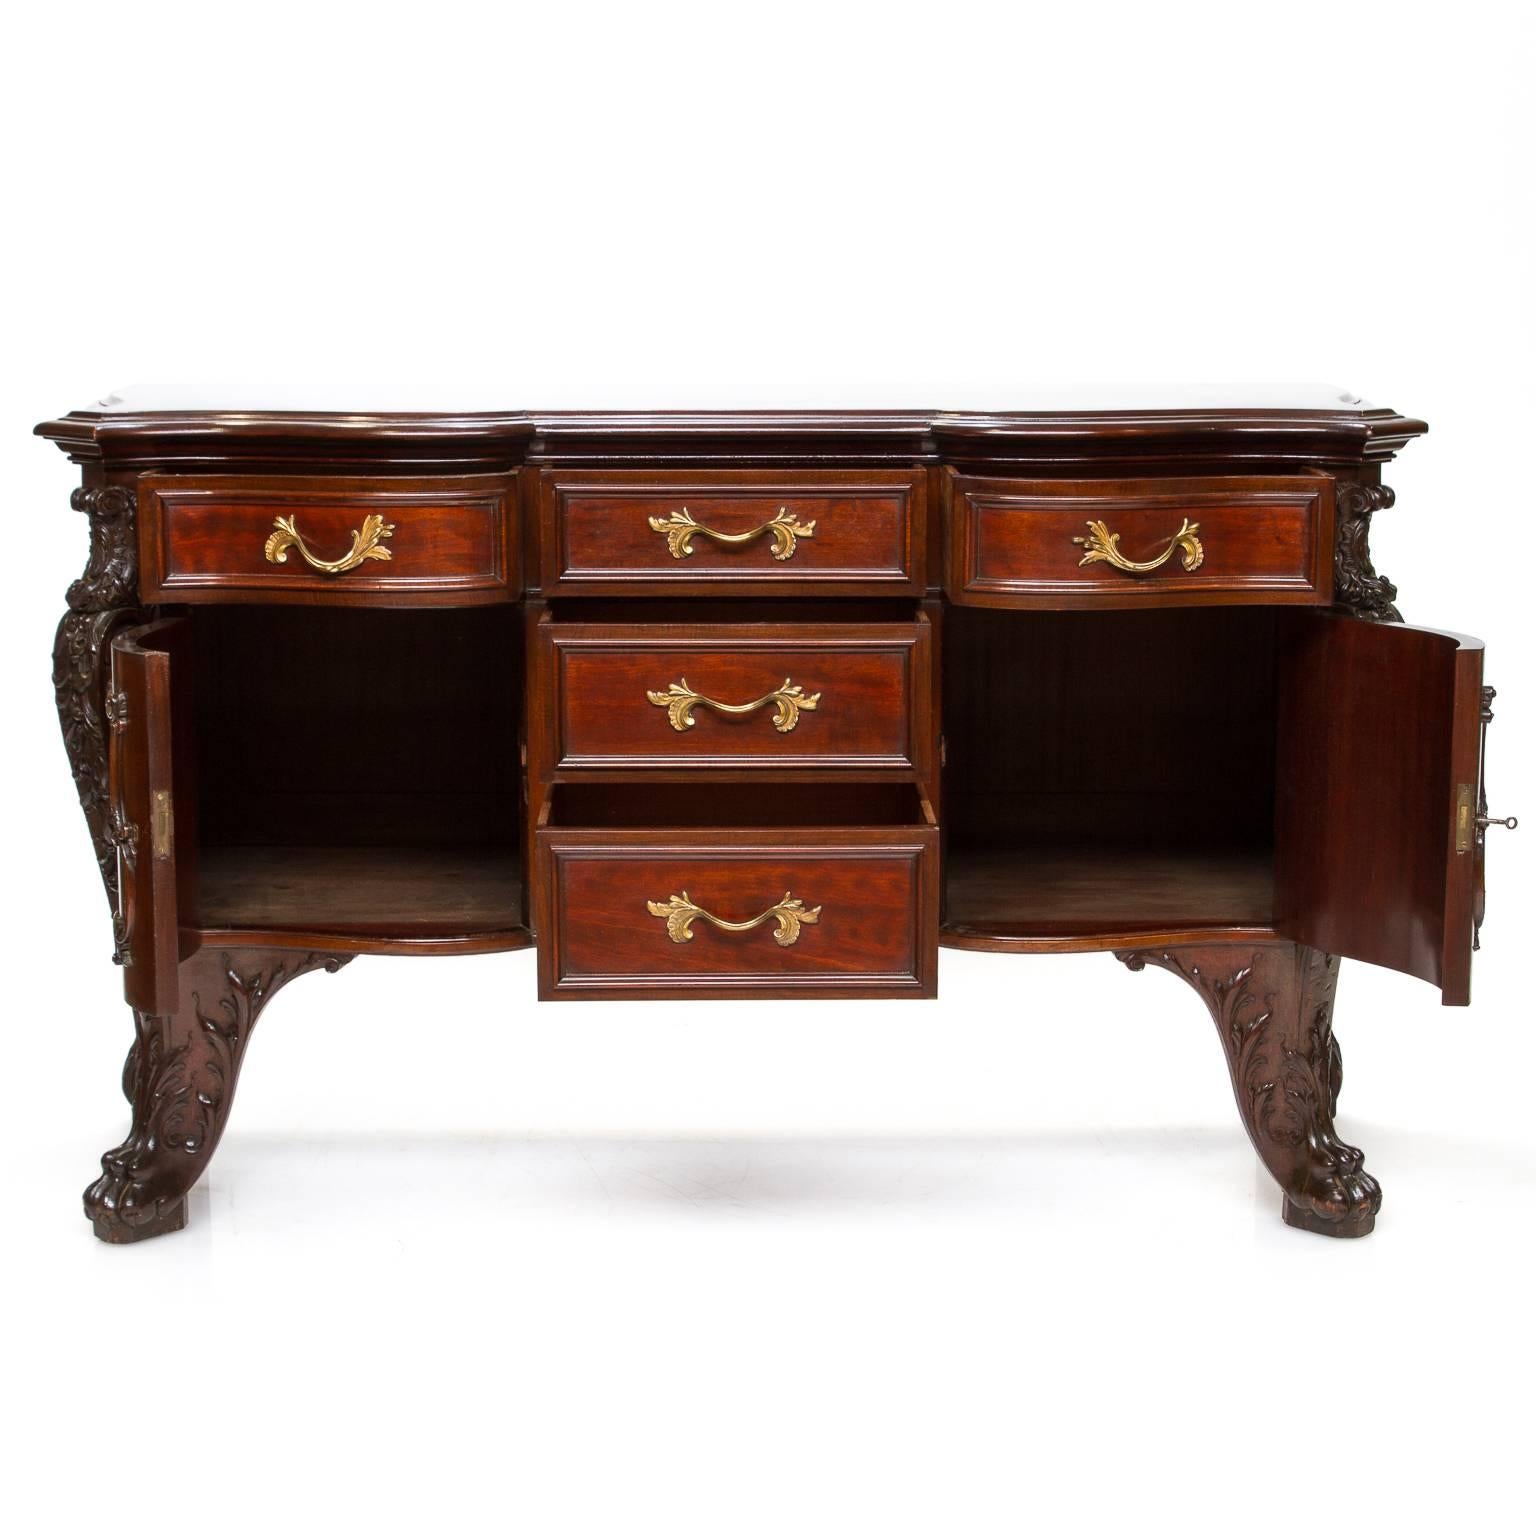 An elaborate solid mahogany commode with bombé shape and shaped front. This piece is signed 